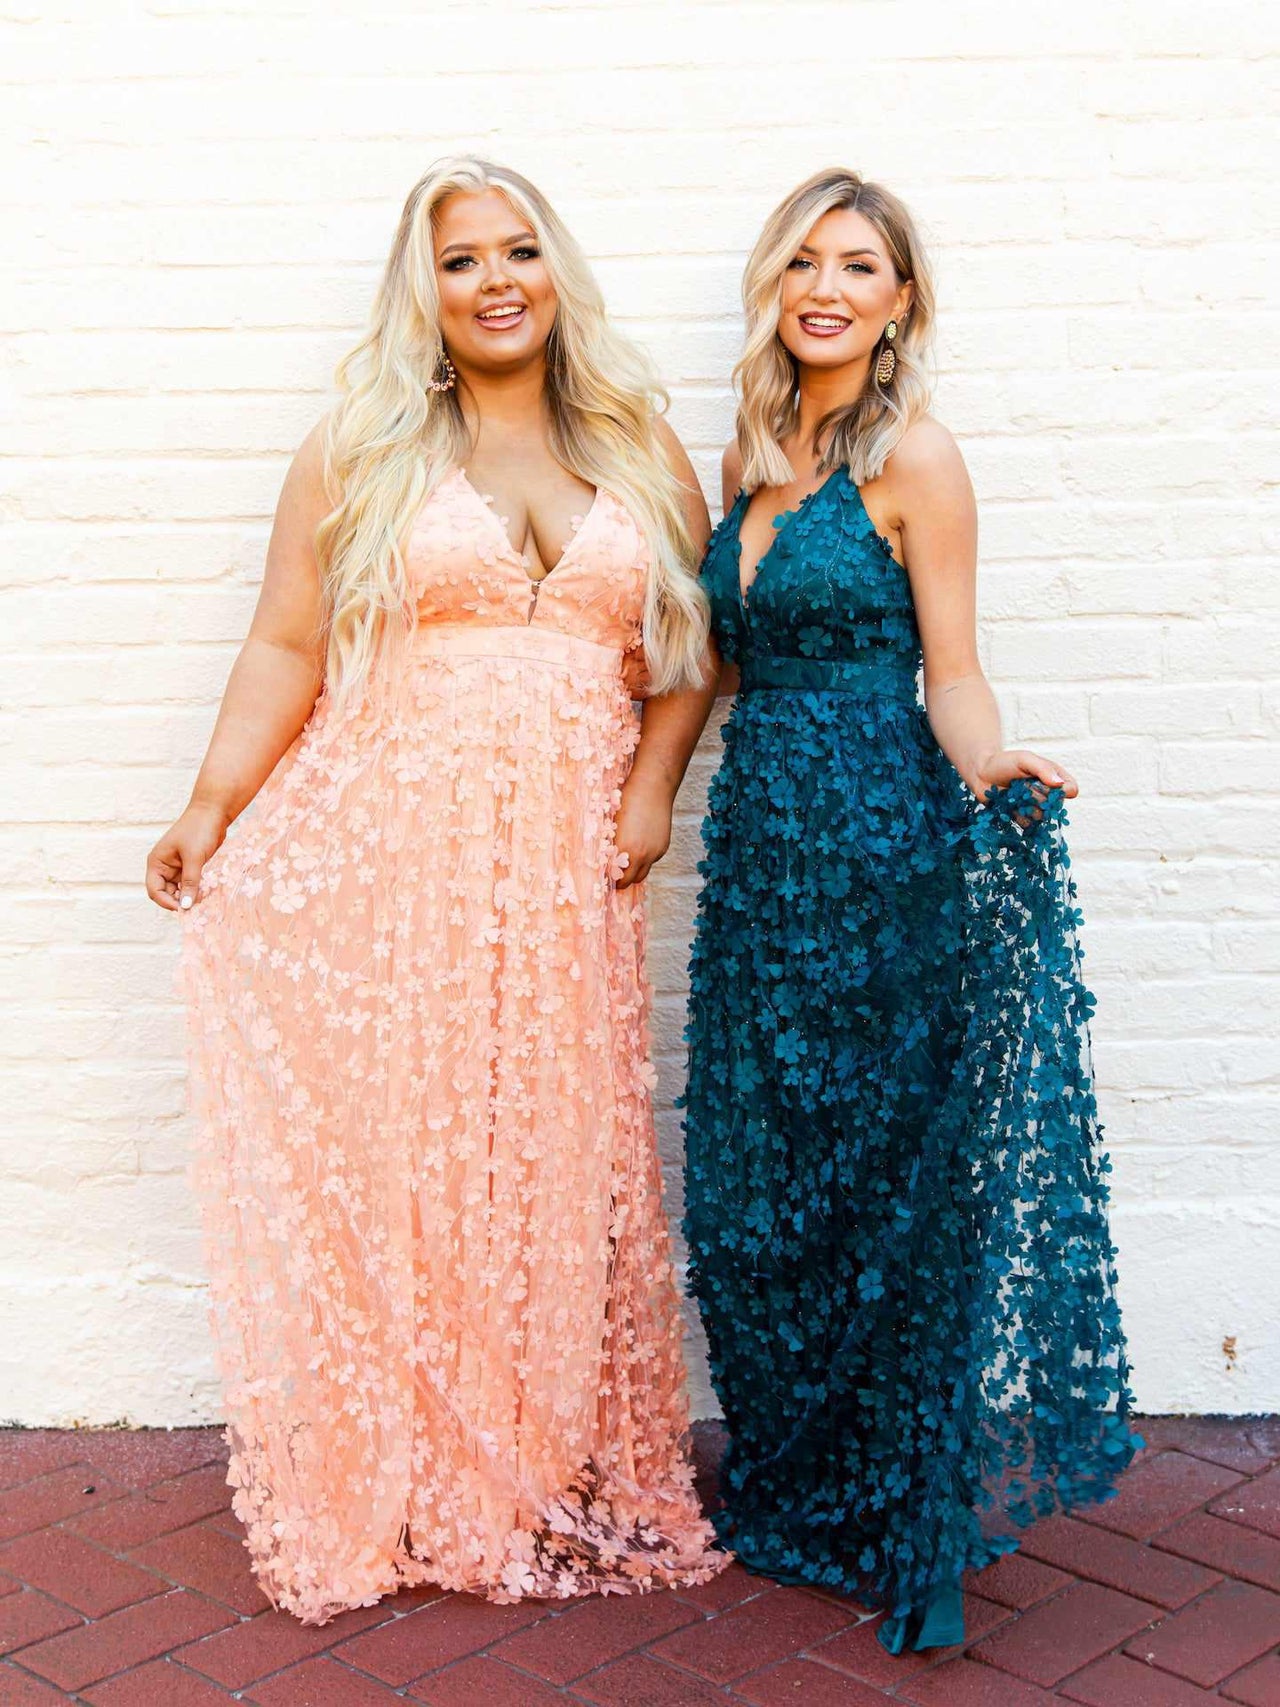 Look so Good — Boho Bridesmaid Dress in Pink-Dresses-Southern Fried Chics